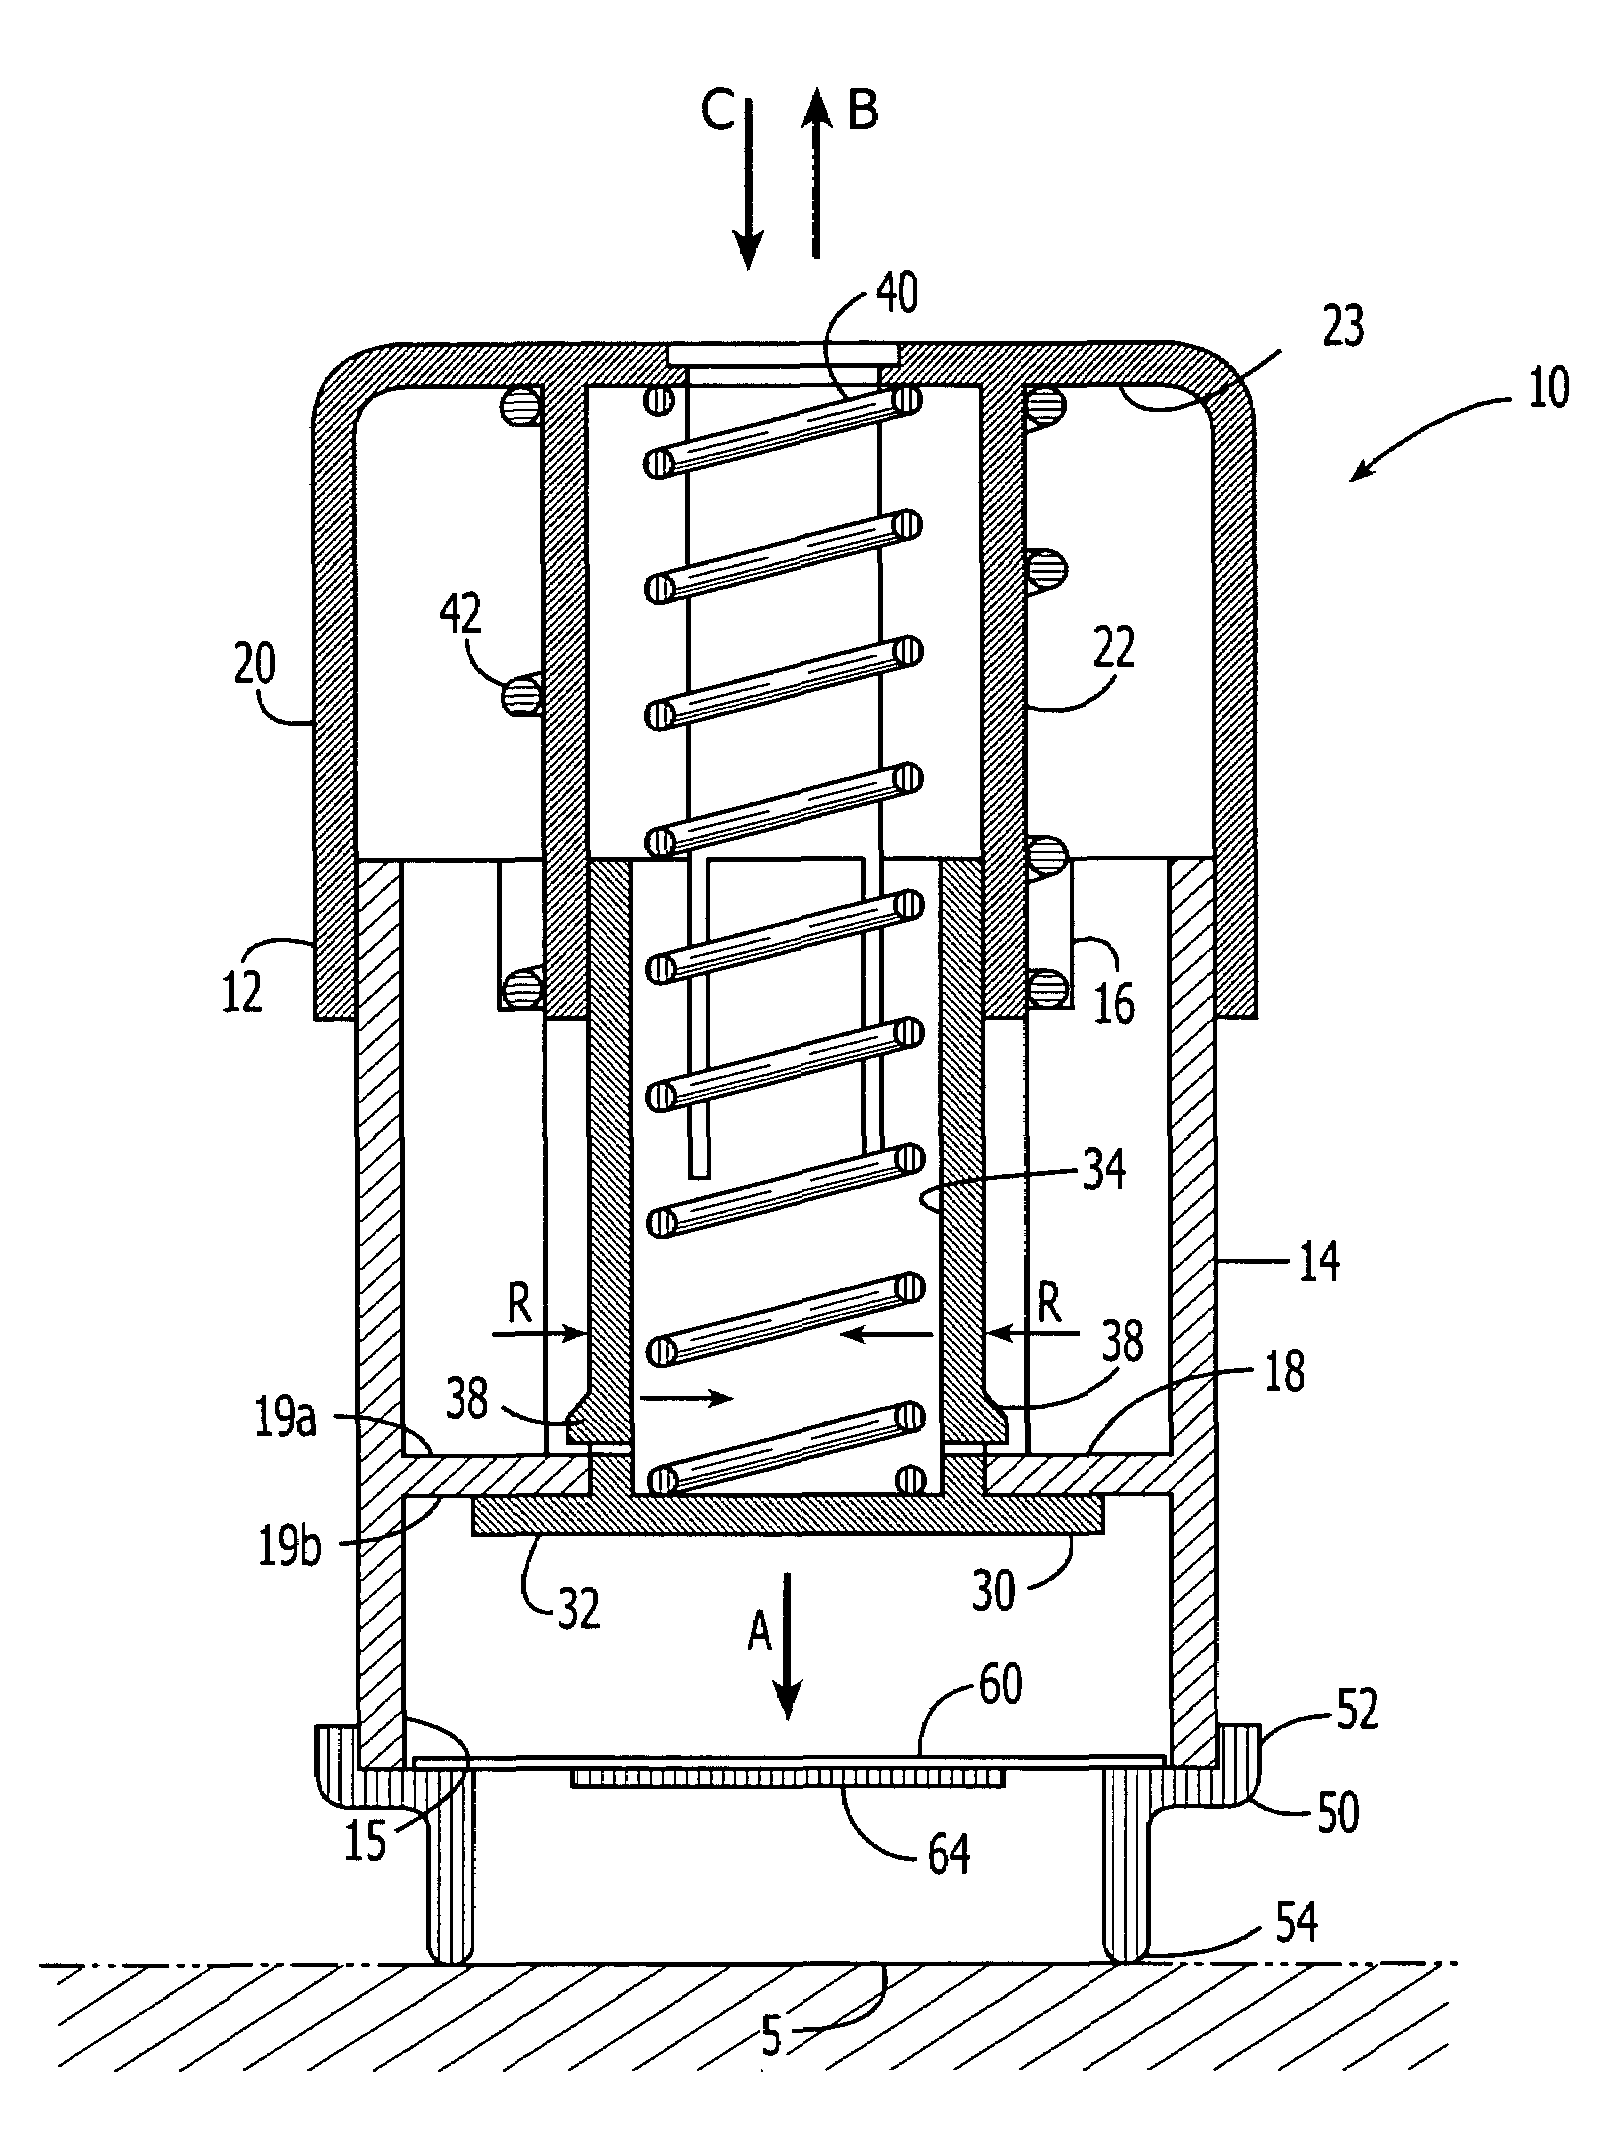 Self-actuating applicator for microprojection array